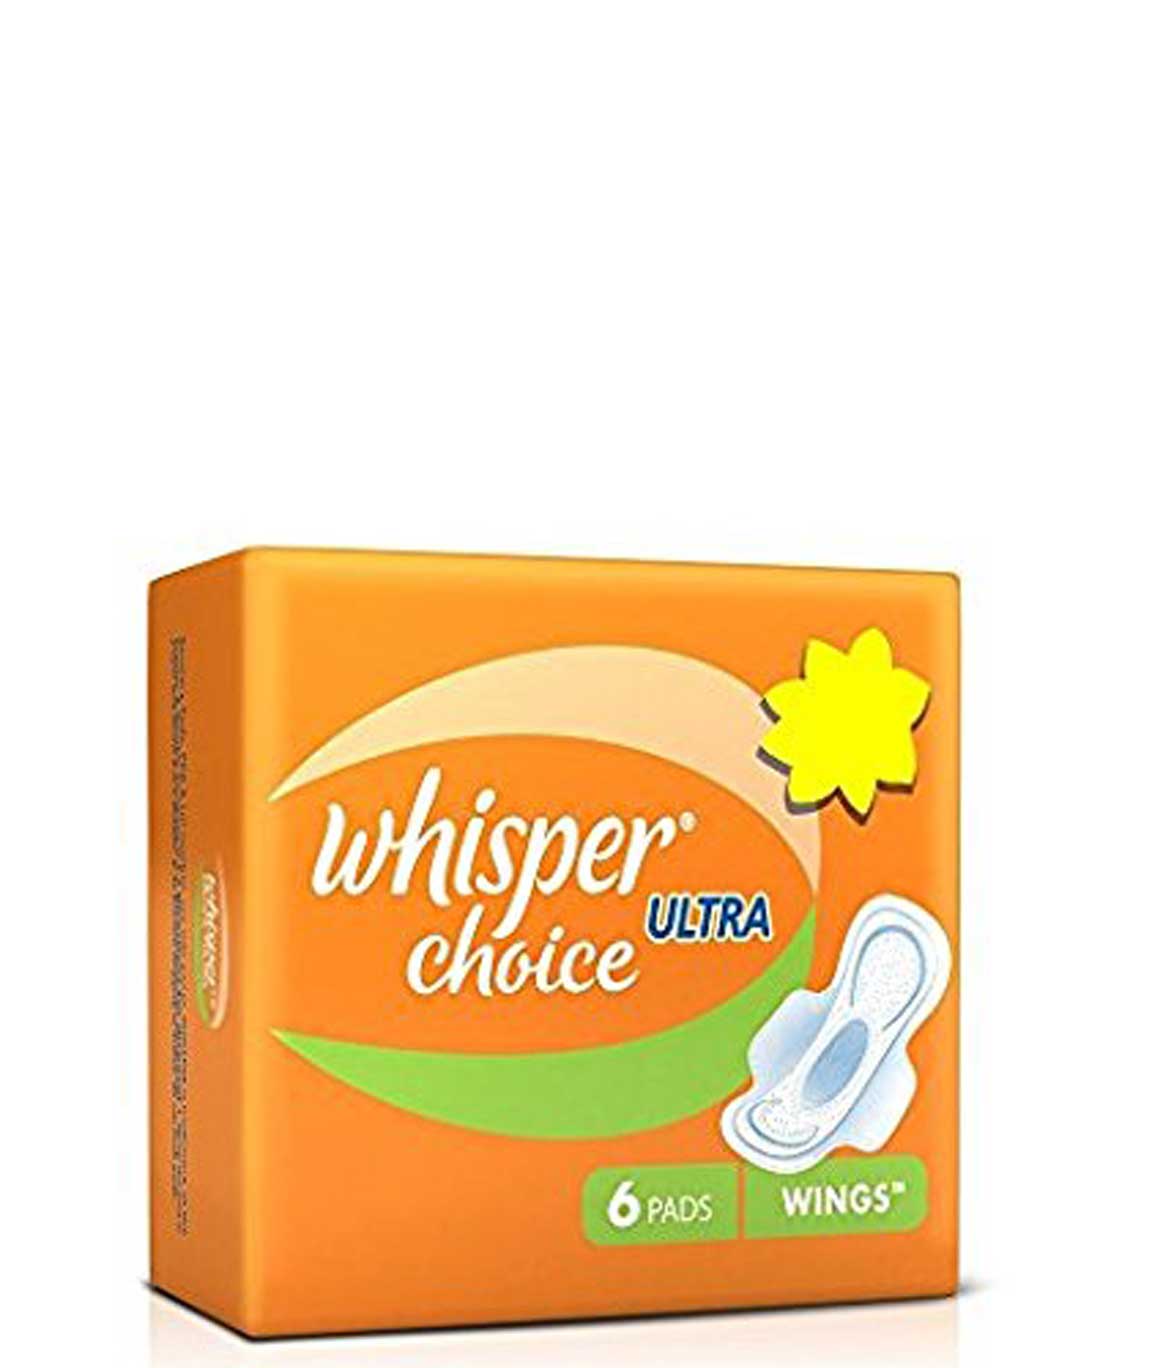 Whisper Choice Ultra (6 Count)